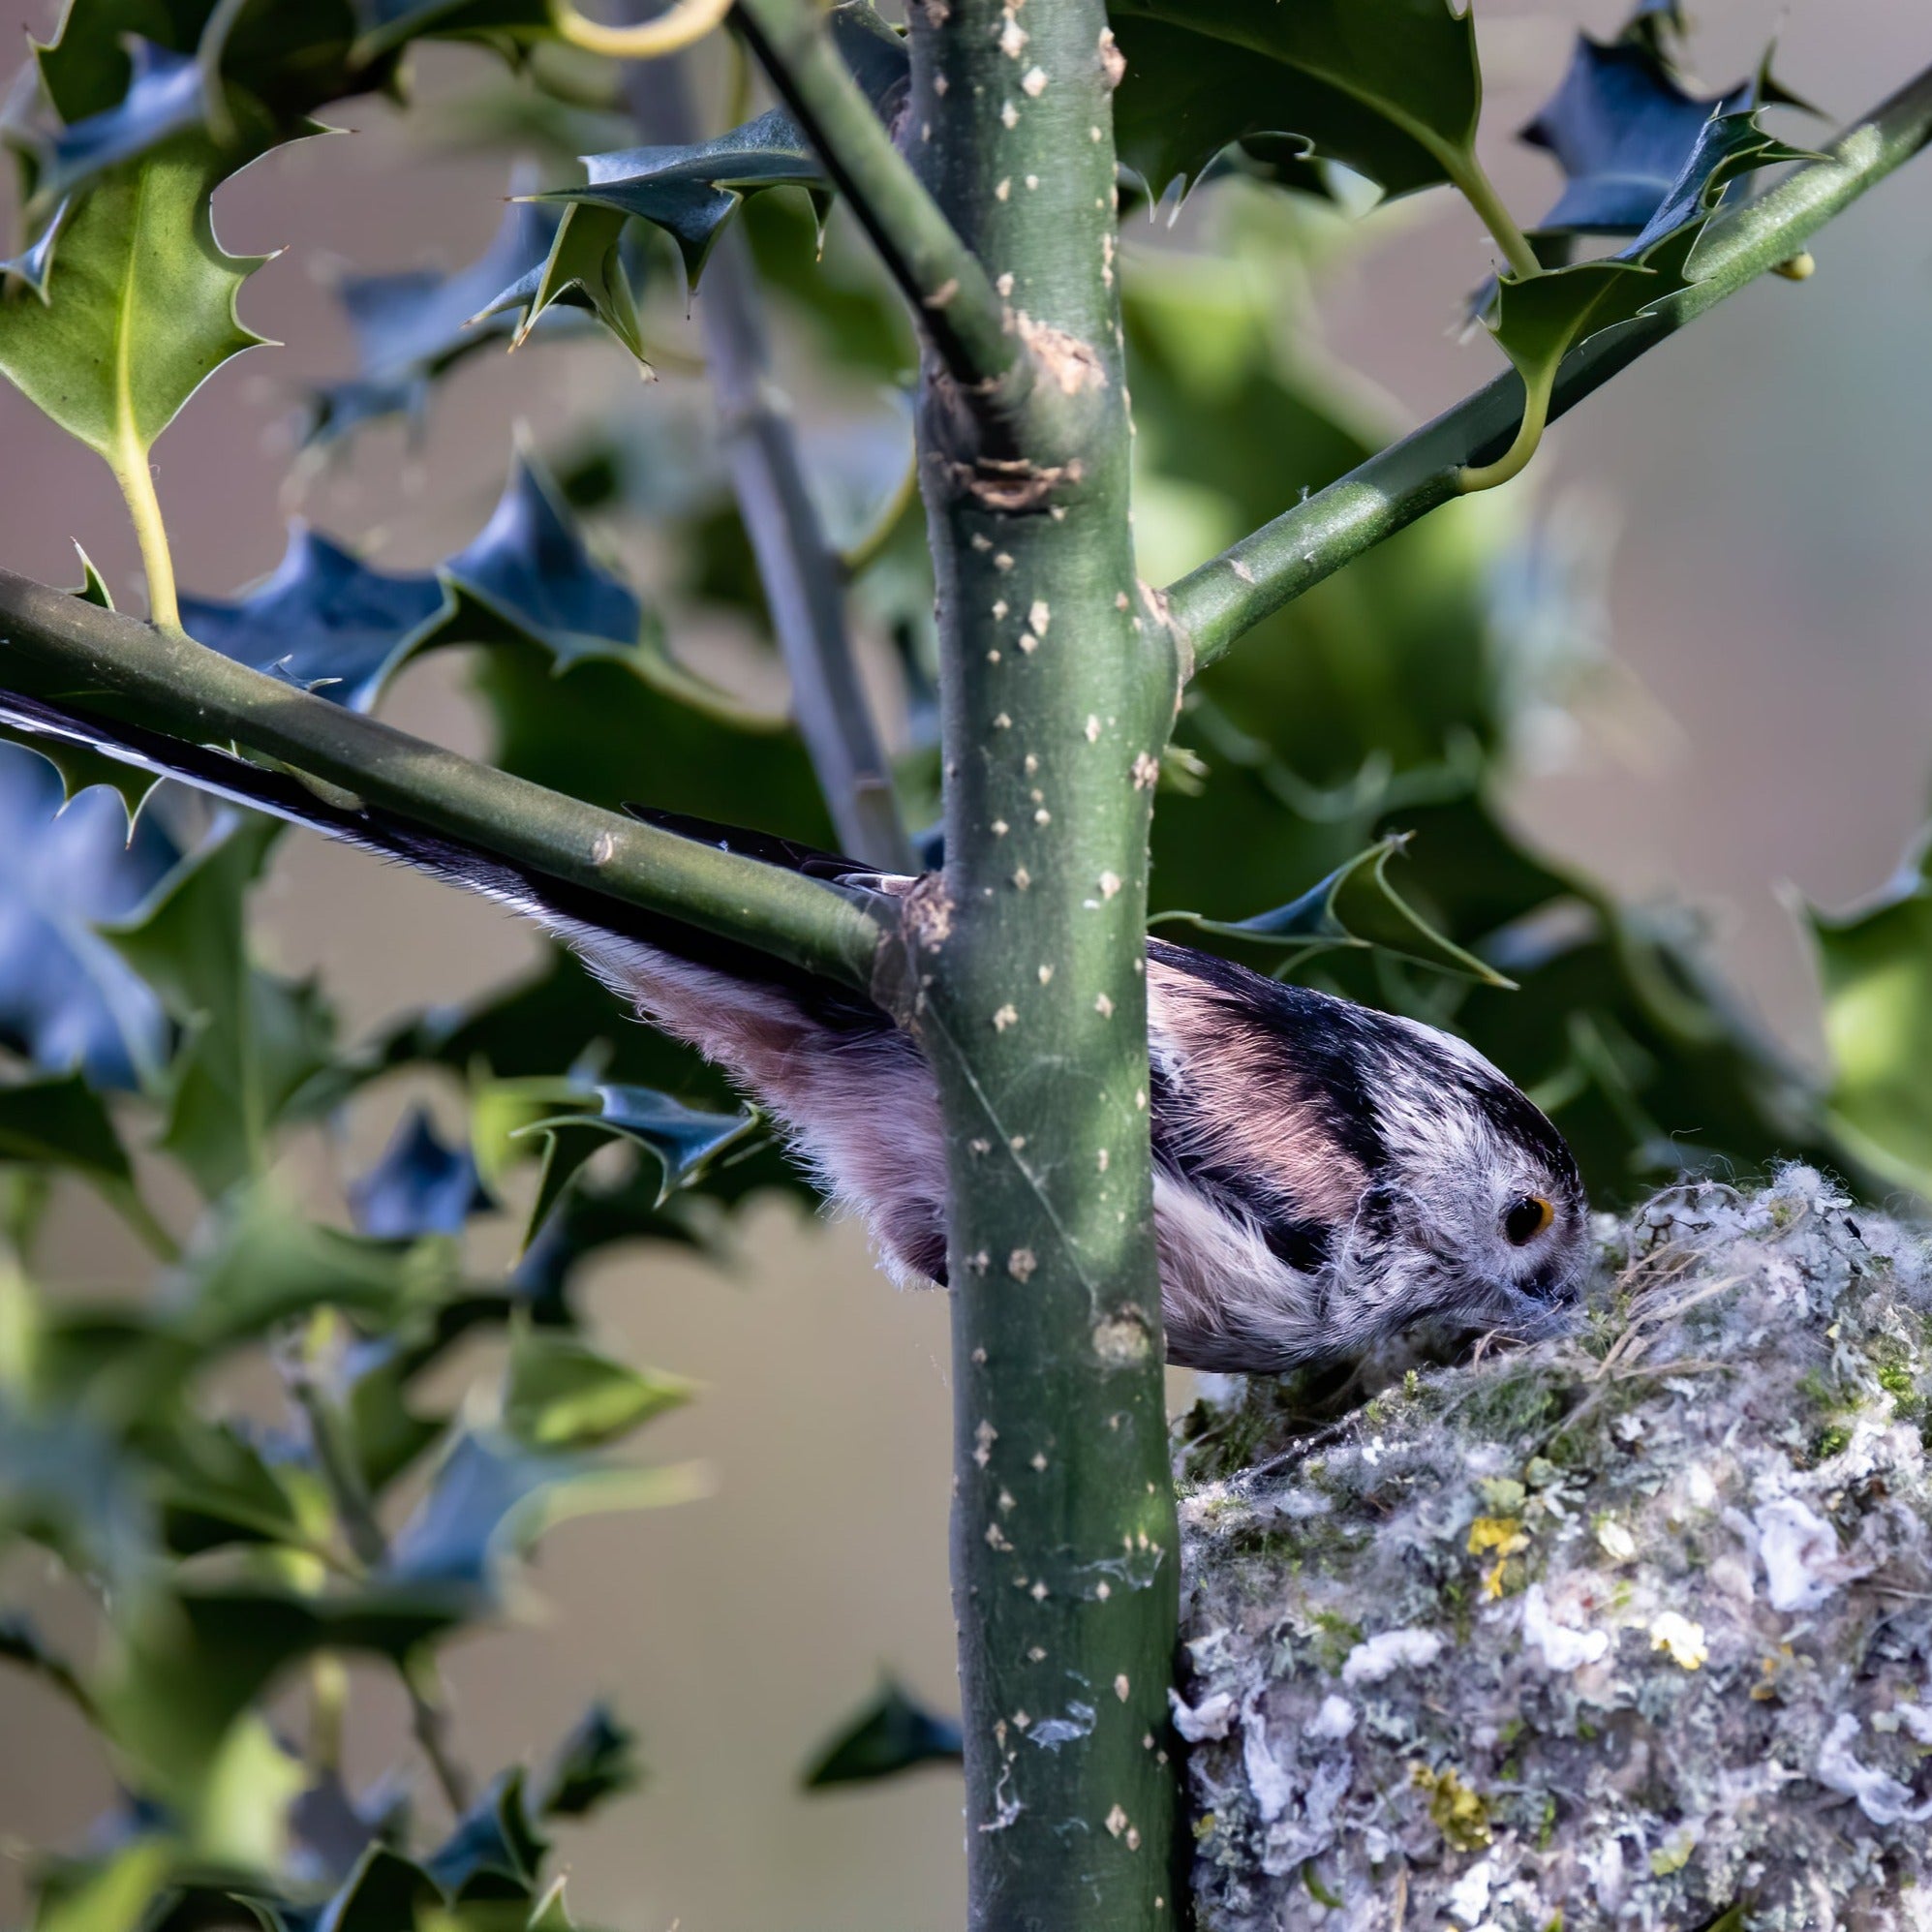 Long tailed tit builds nest using lichens